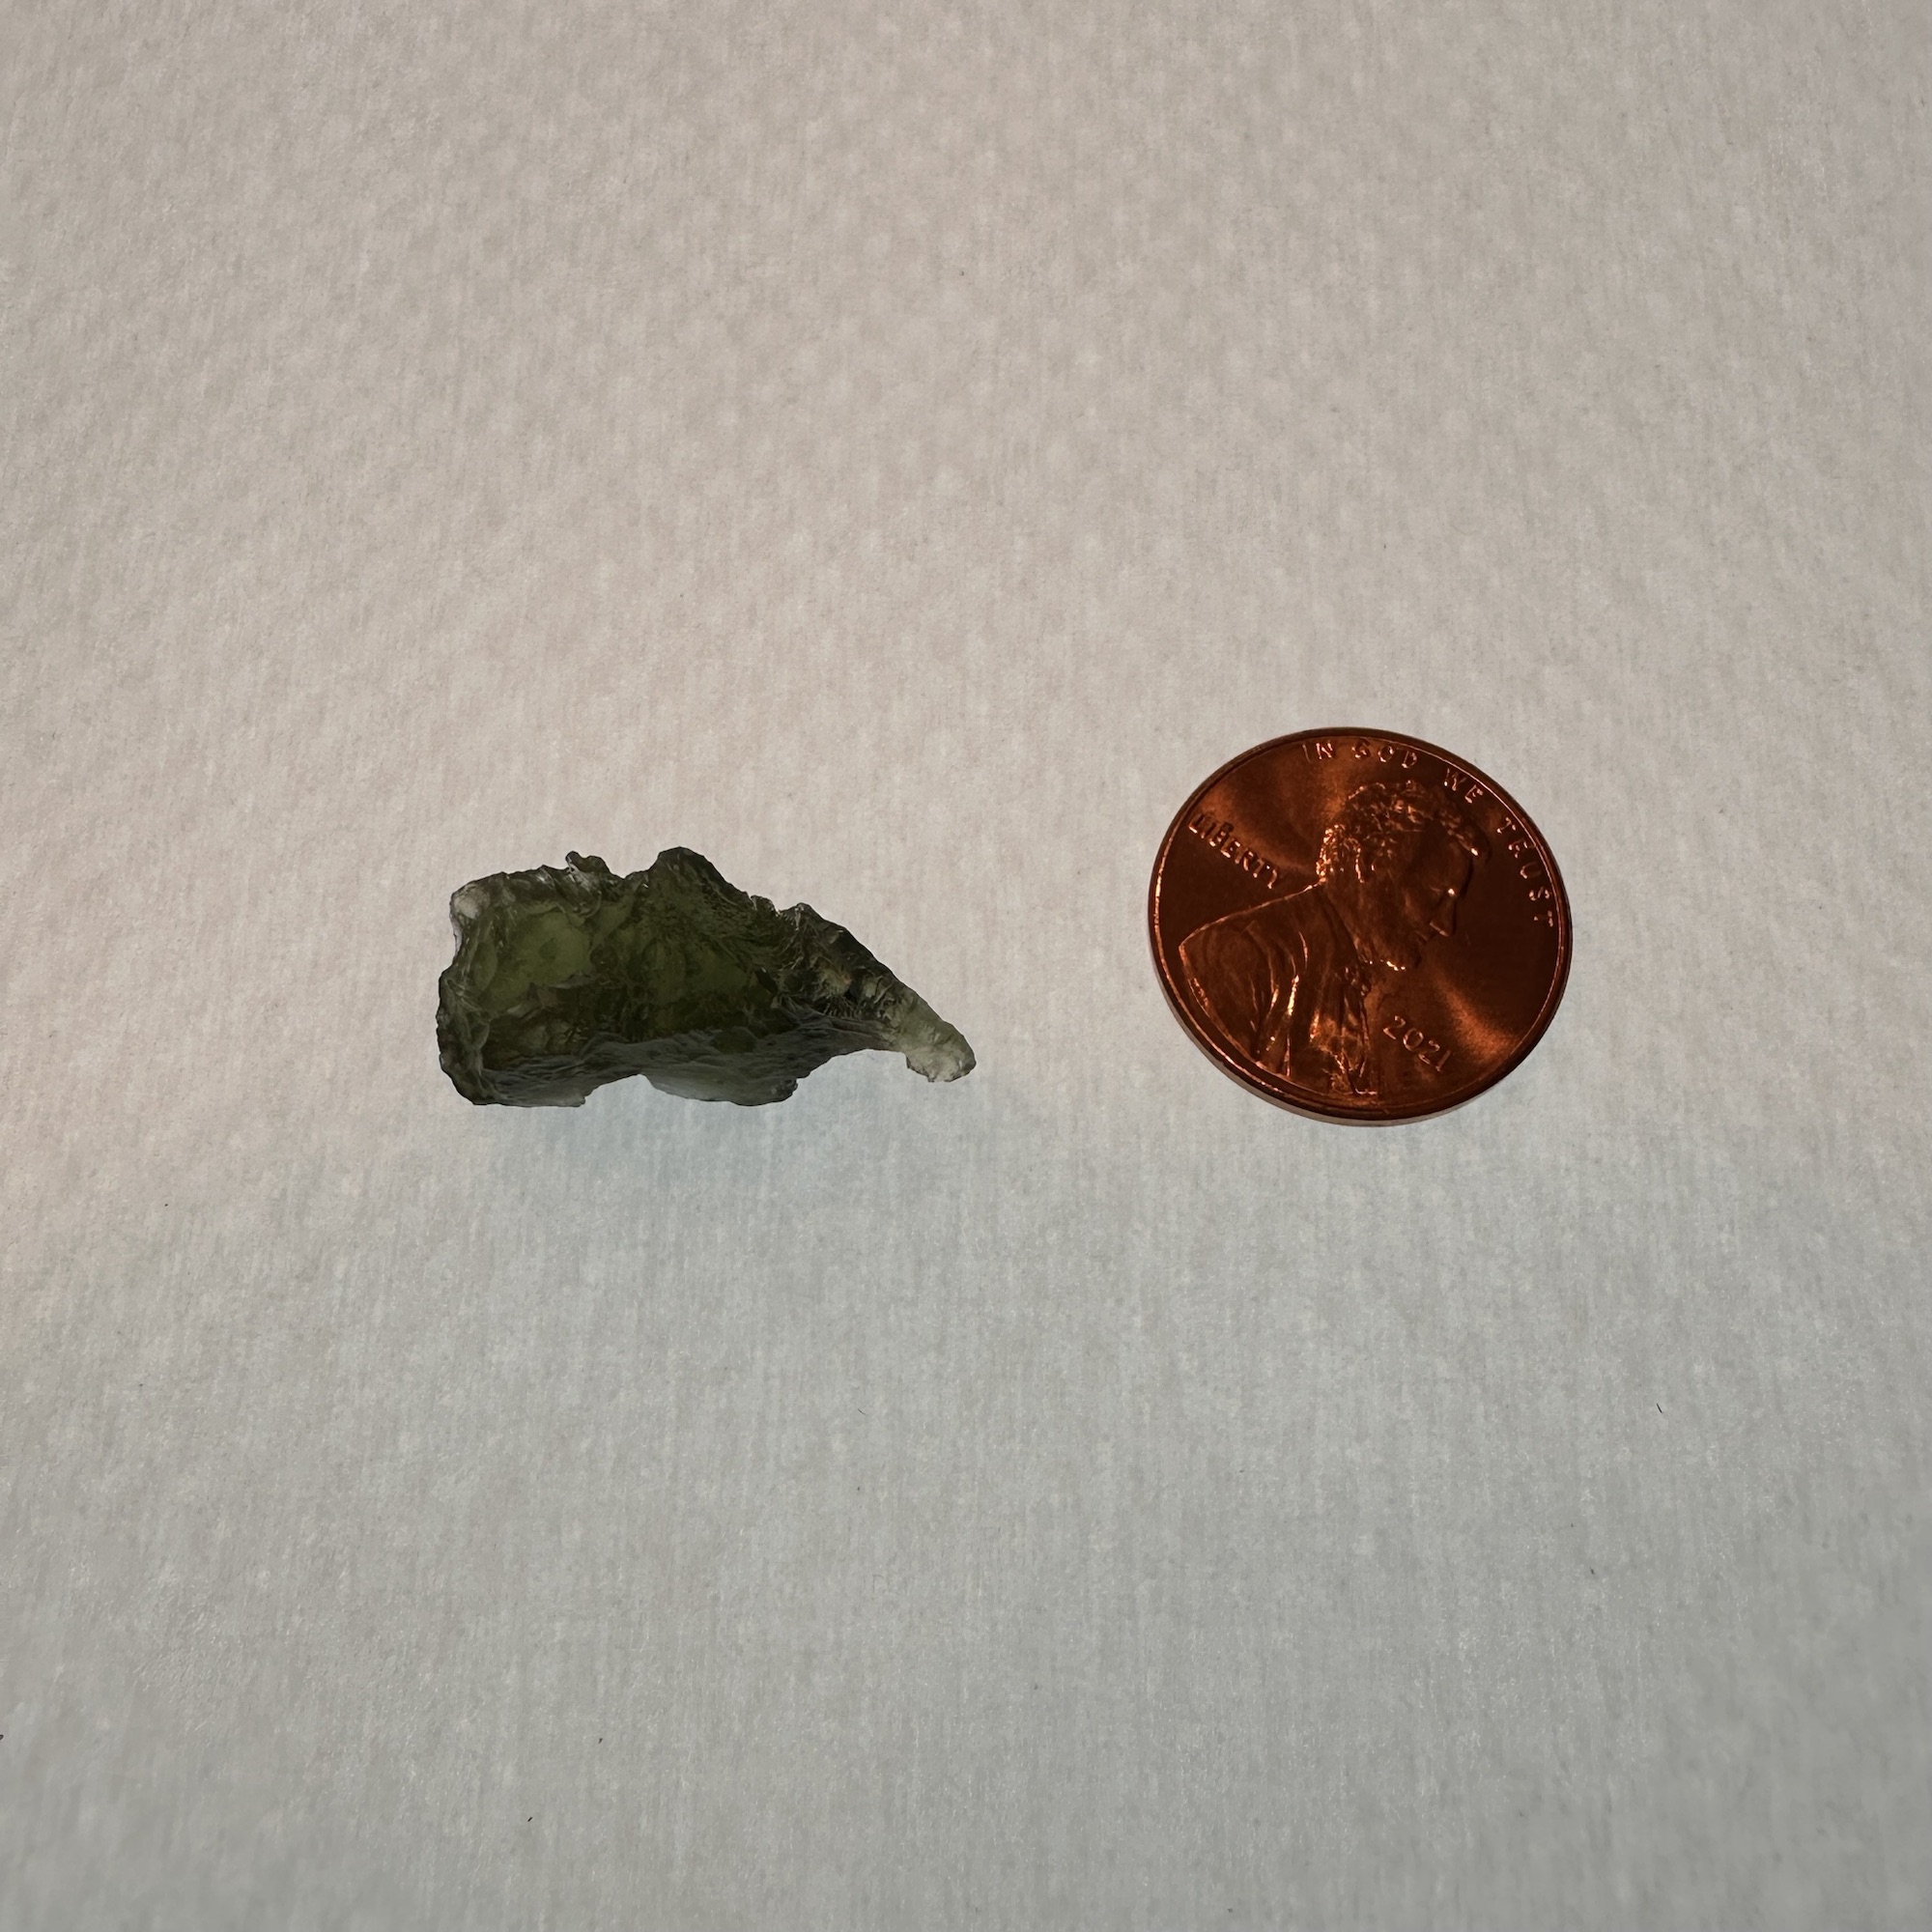 A green translucent Moldavite sitting next to a penny for a size comparison